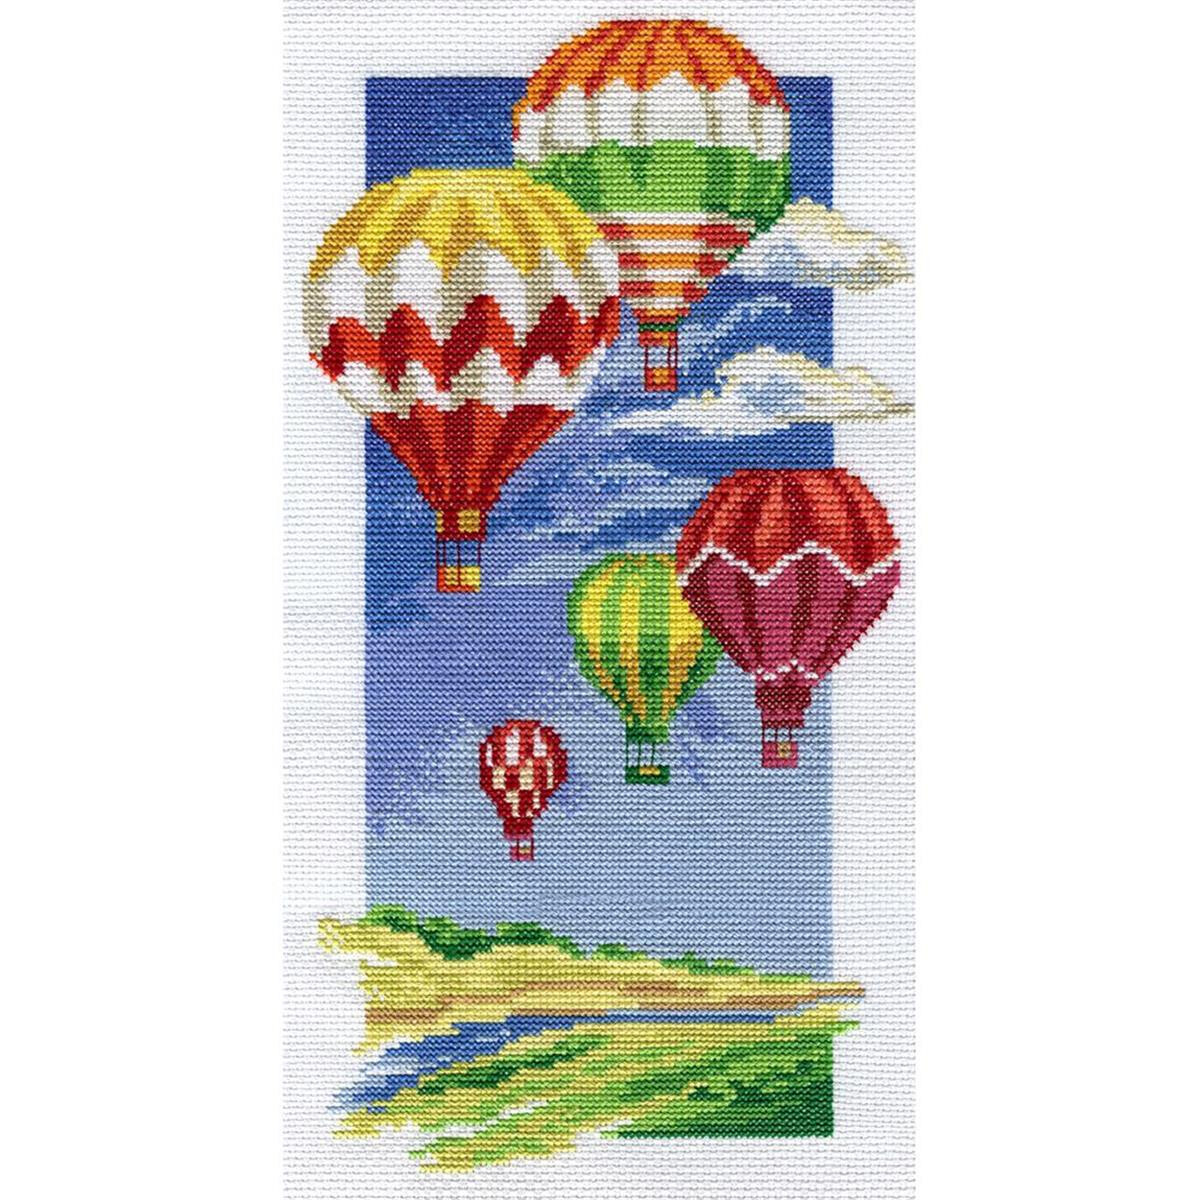 Panna counted cross stitch kit "Air Balloons"...